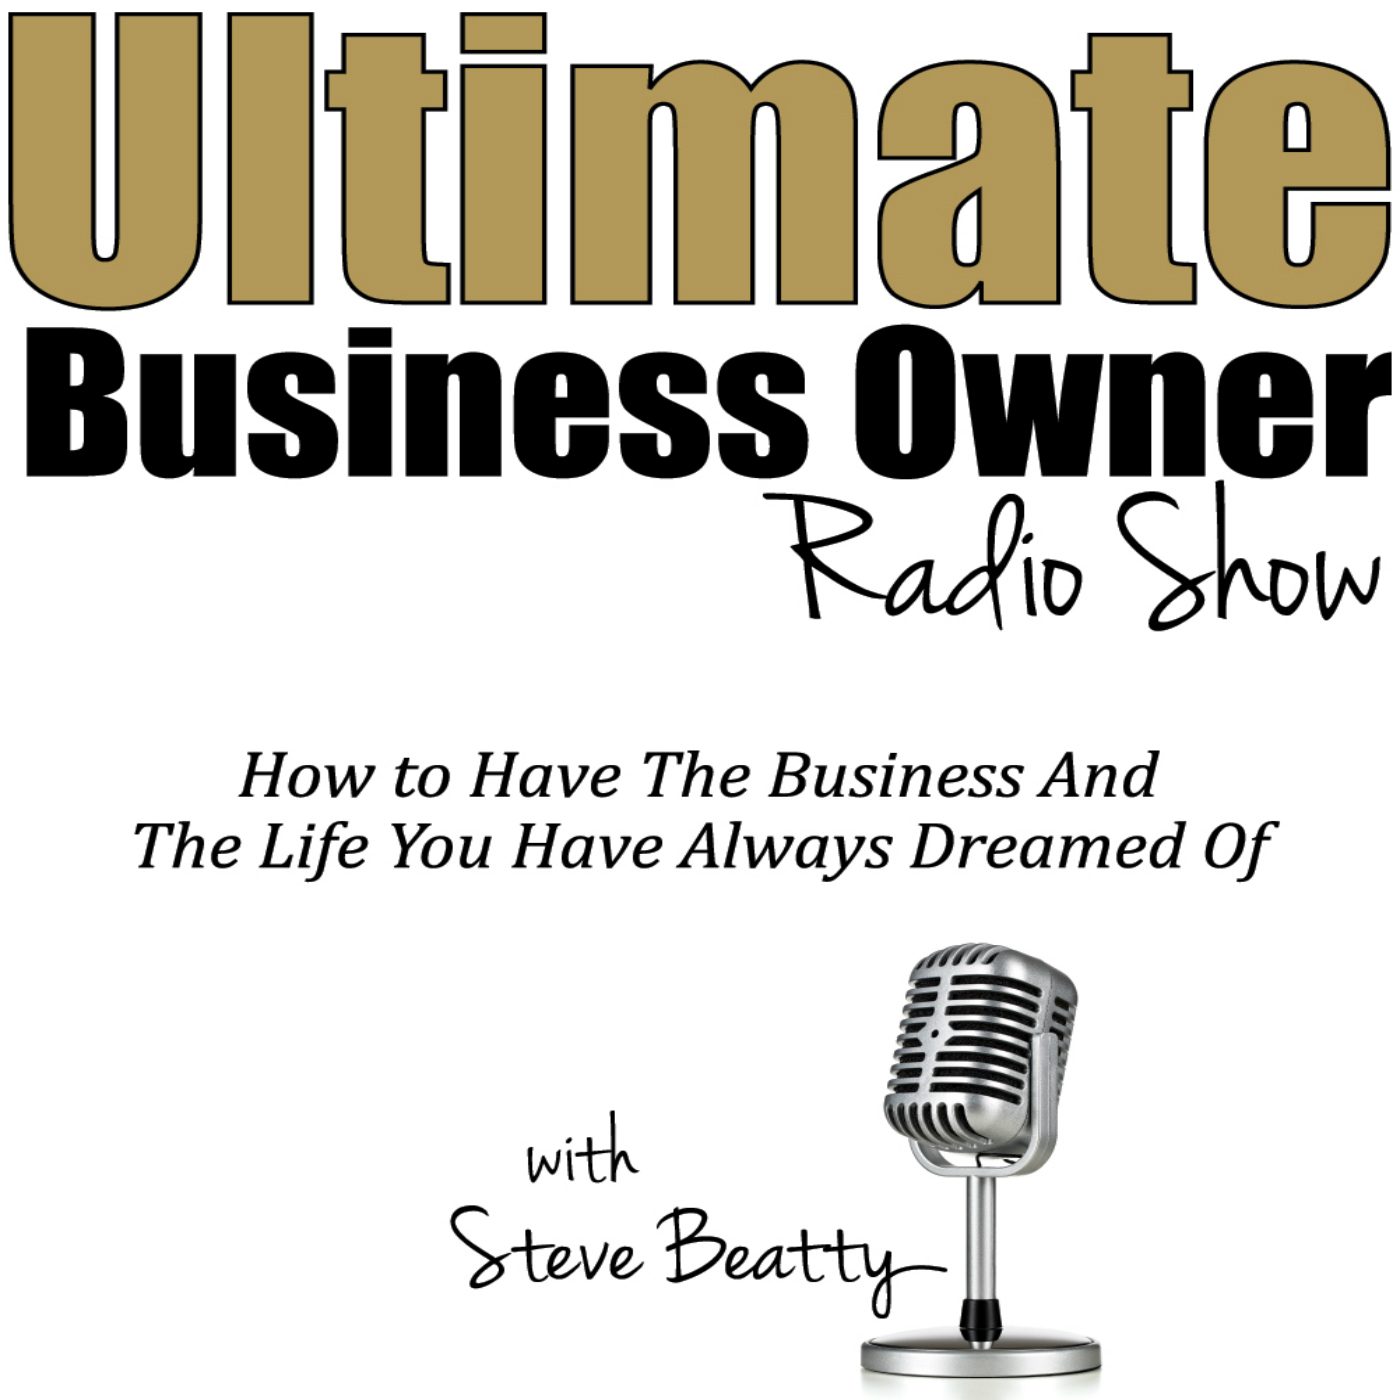 Ultimate Business Owner: The State of the Art in Medical Device Technology - Caesar Fonte (20 Minute Interview)